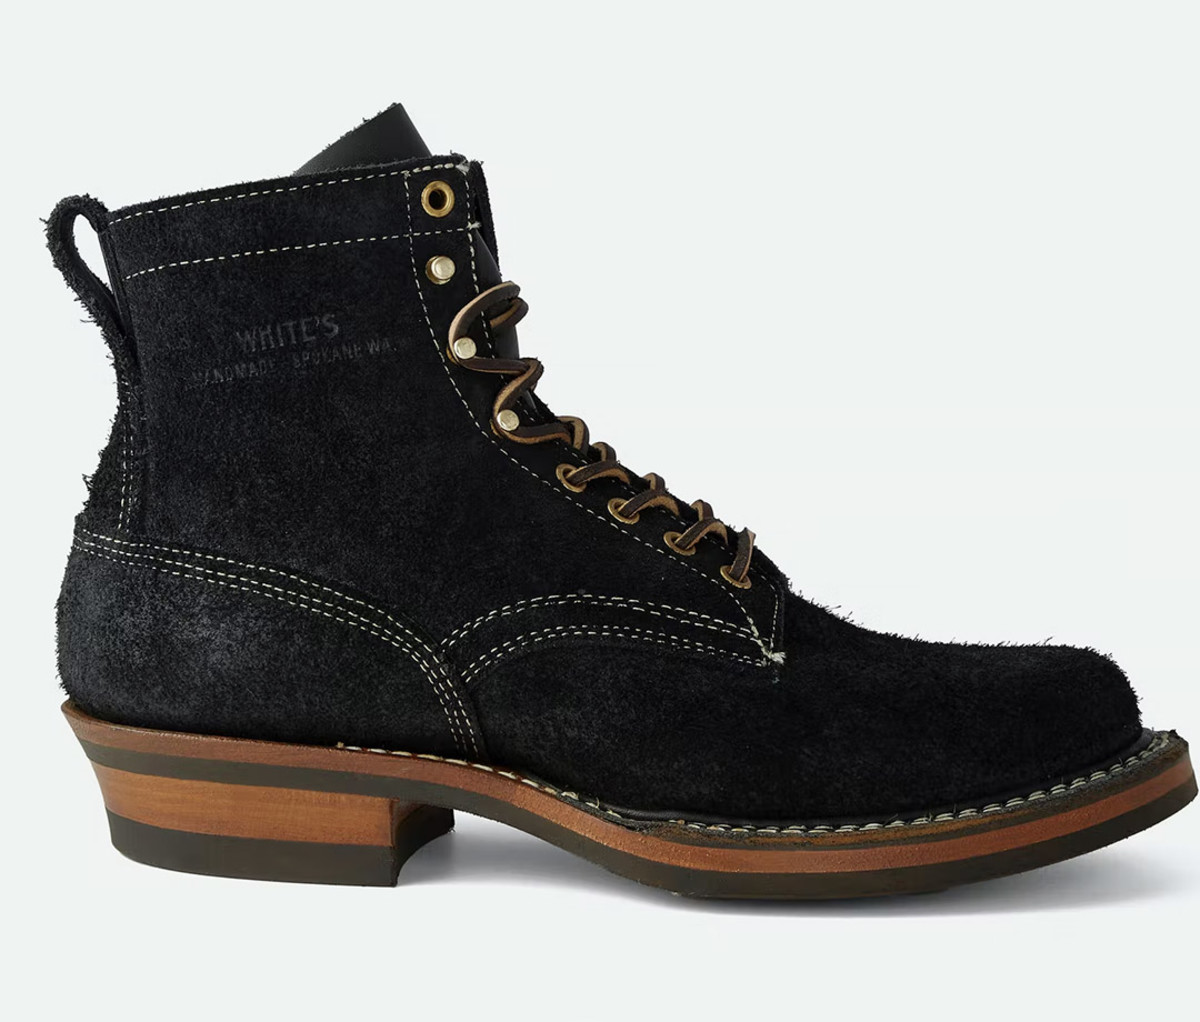 White's Boots 350 Cruiser-MV Roughout Boot